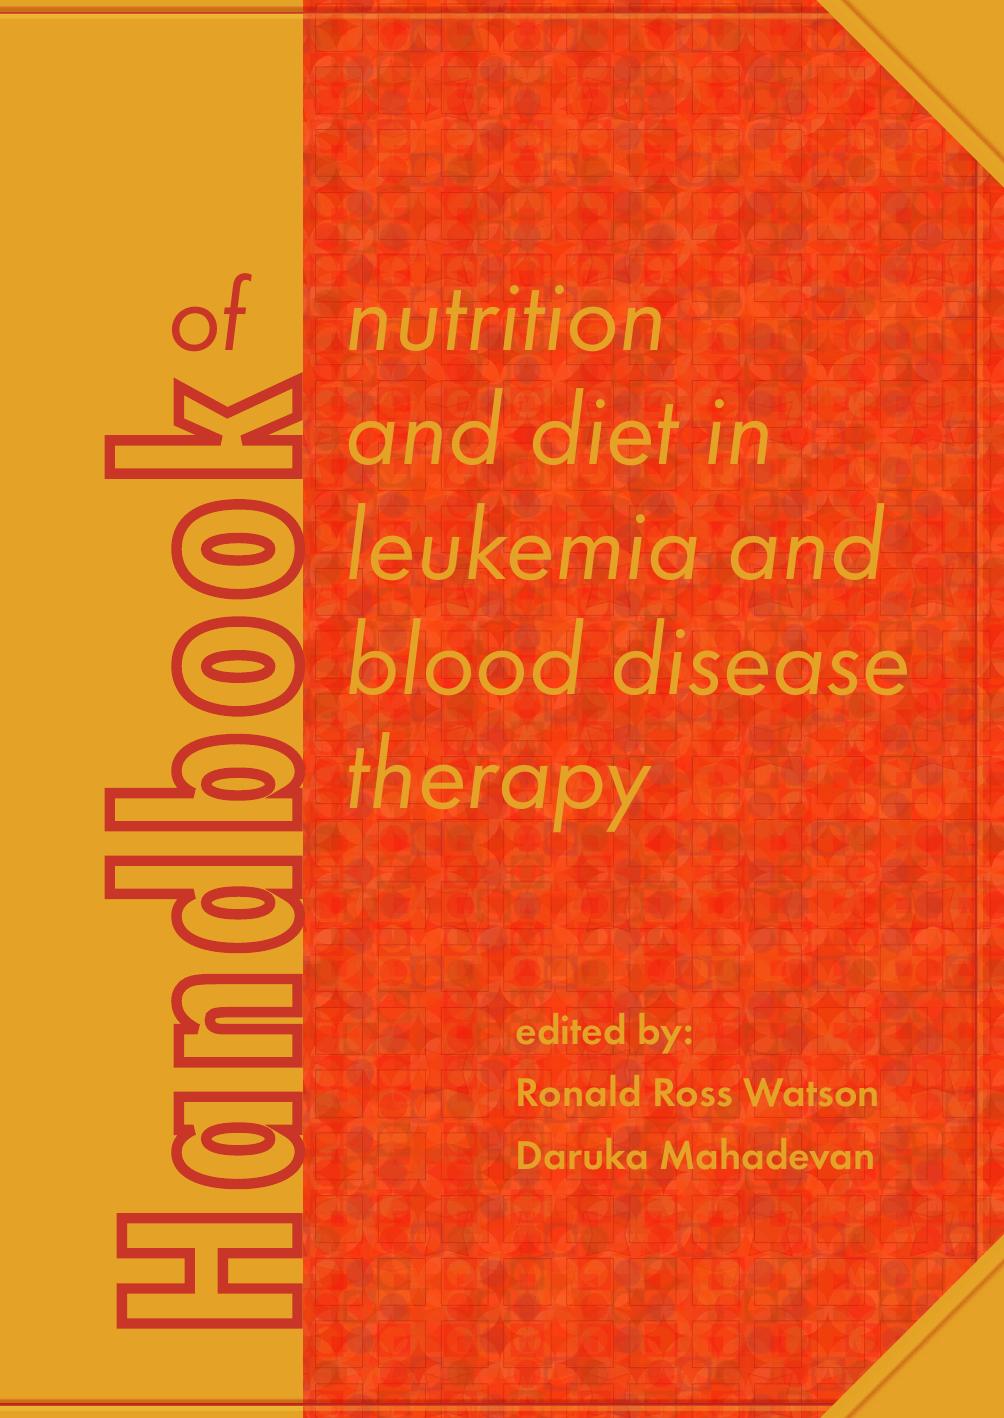 Handbook of nutrition and diet in leukemia and blood disease therapy